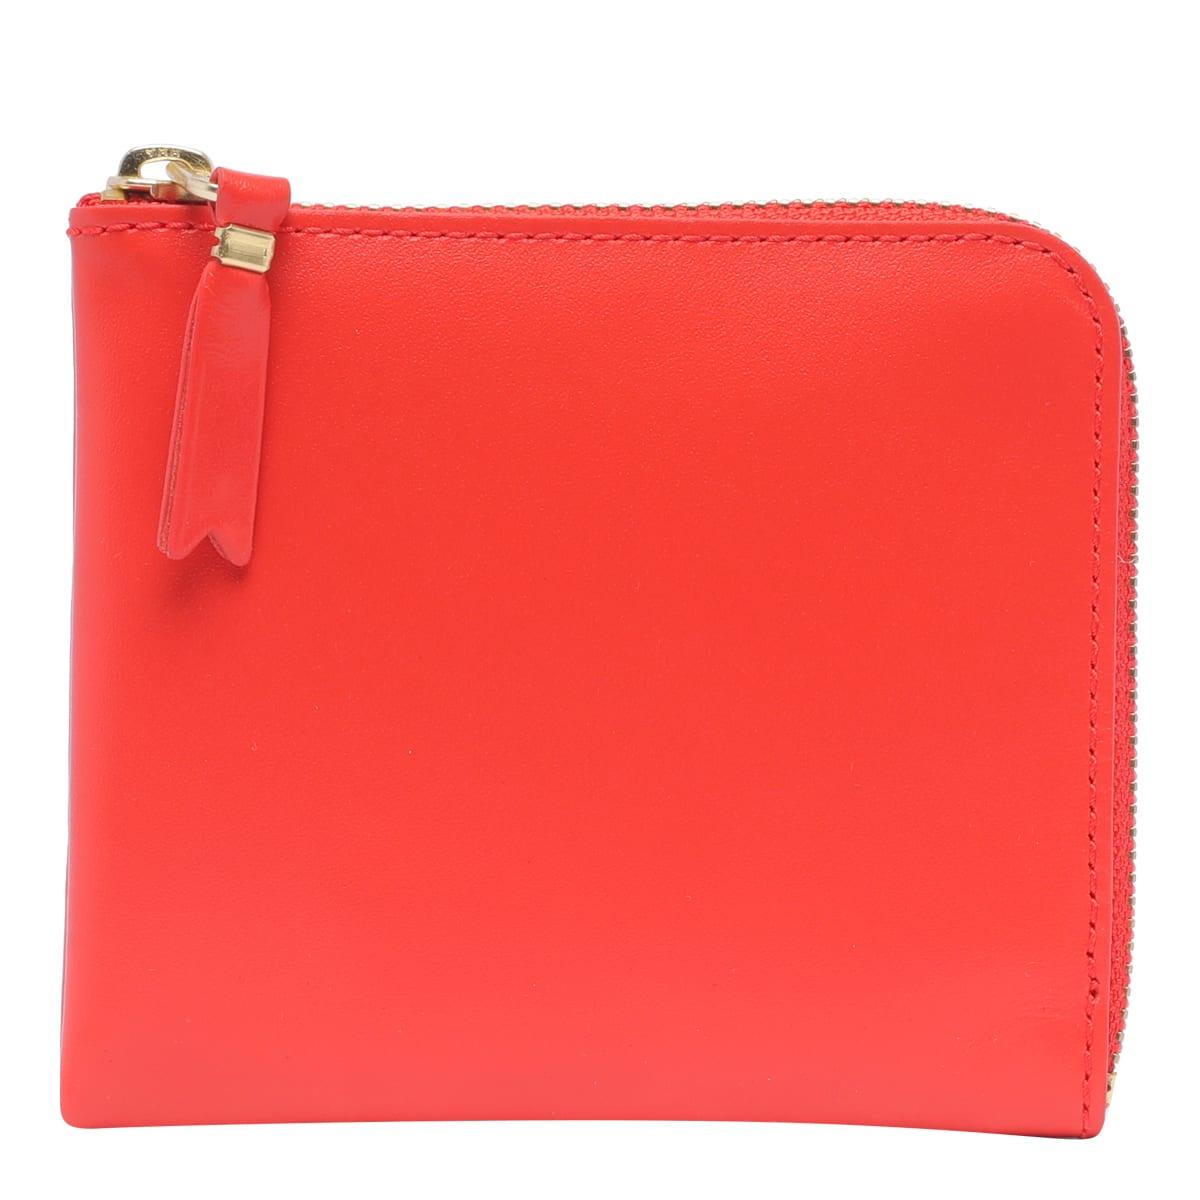 Lines Contrast Leather Wallet in Red